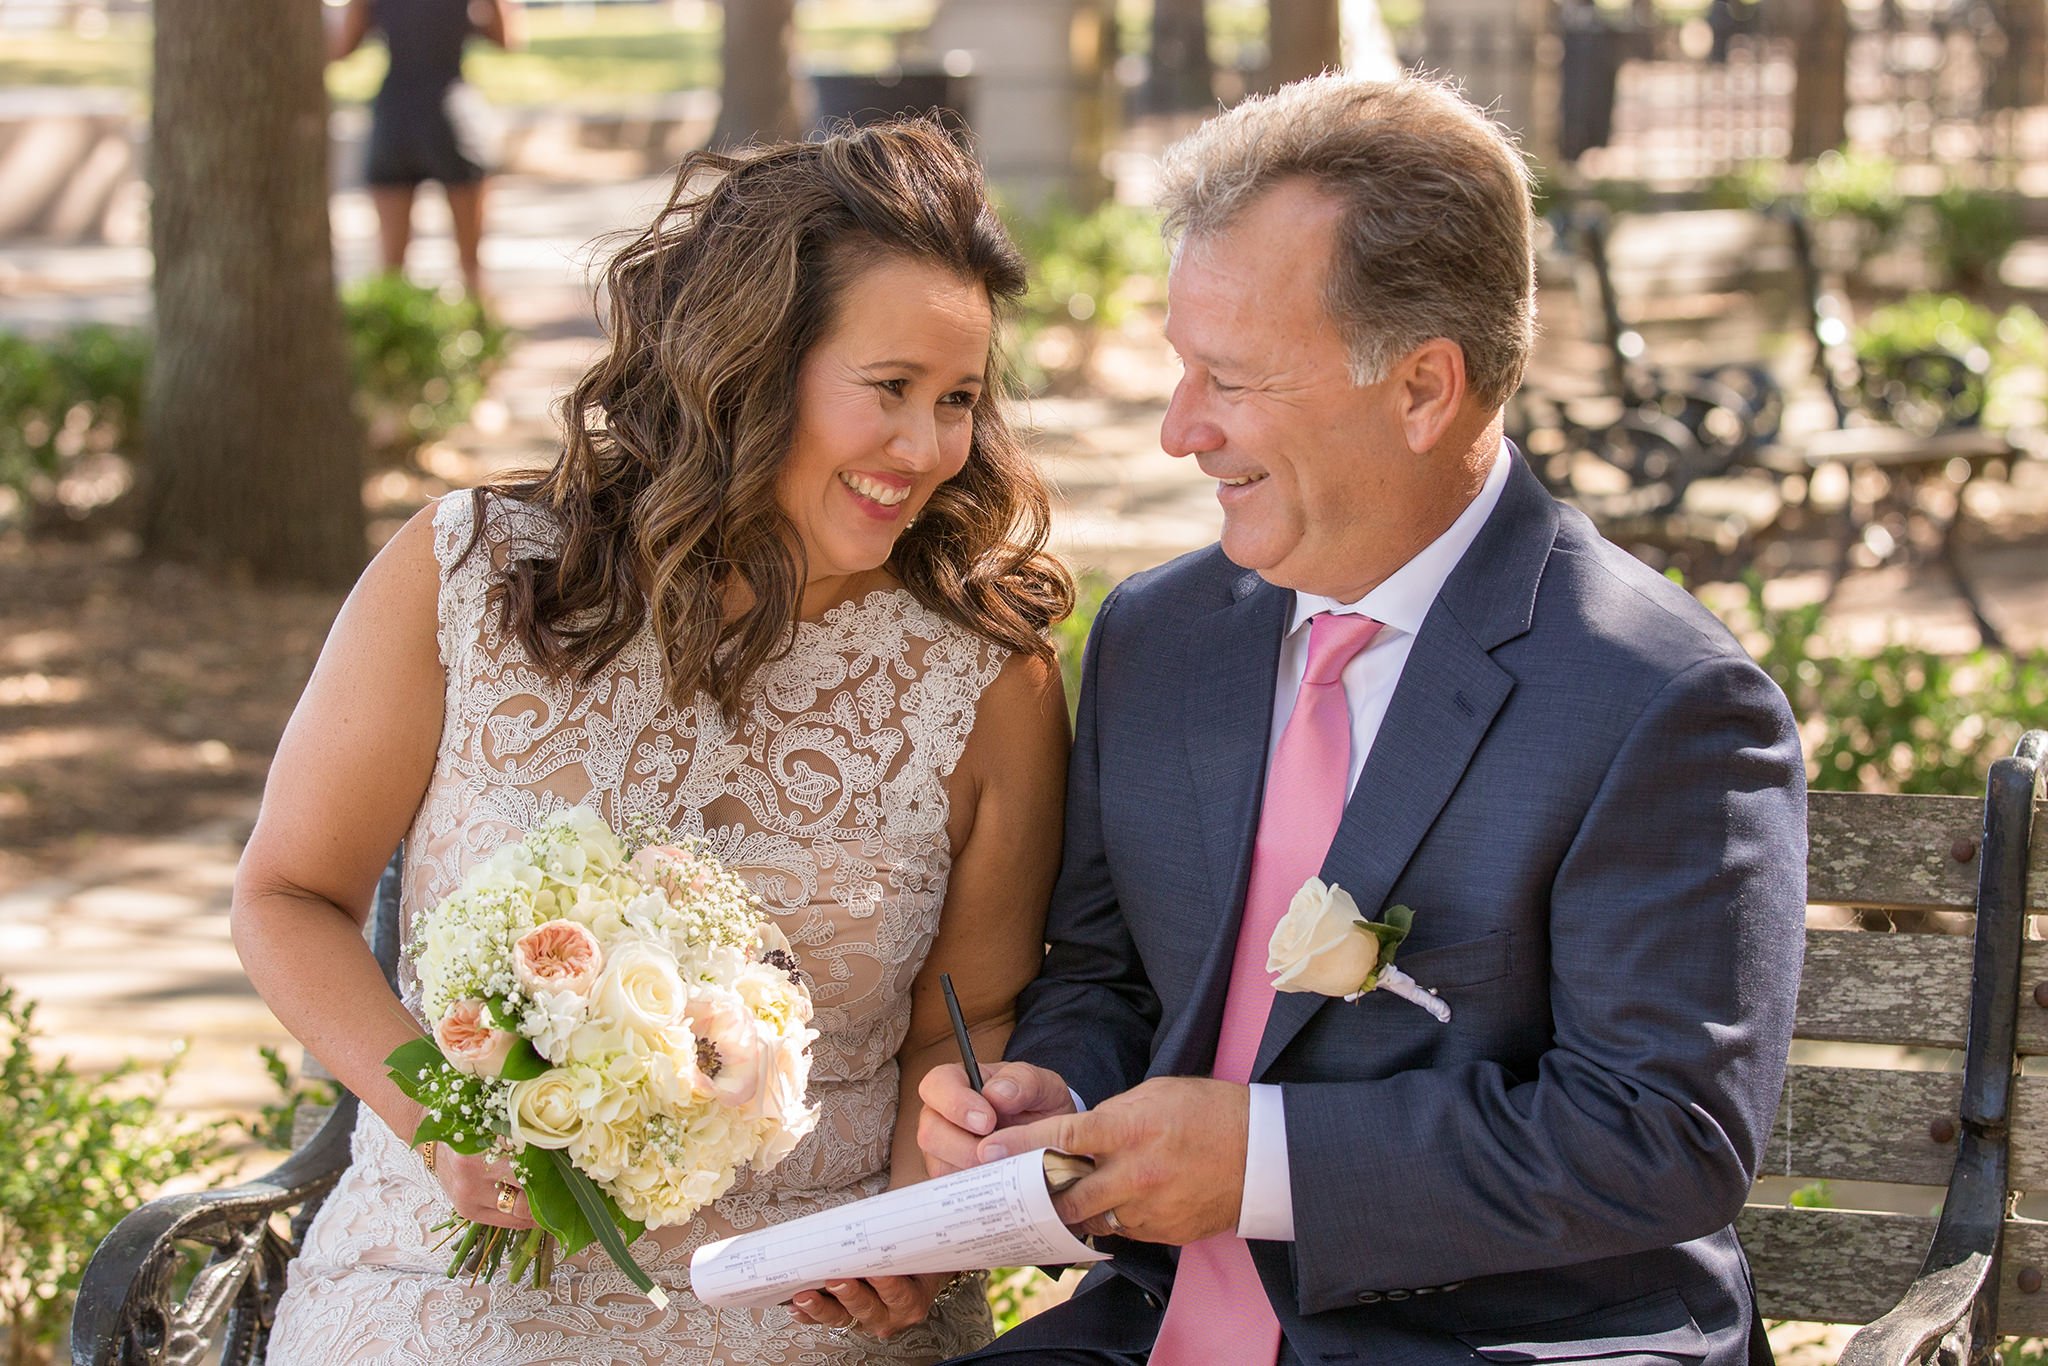 The couple is sitting on the bench, the woman holds the bouquet